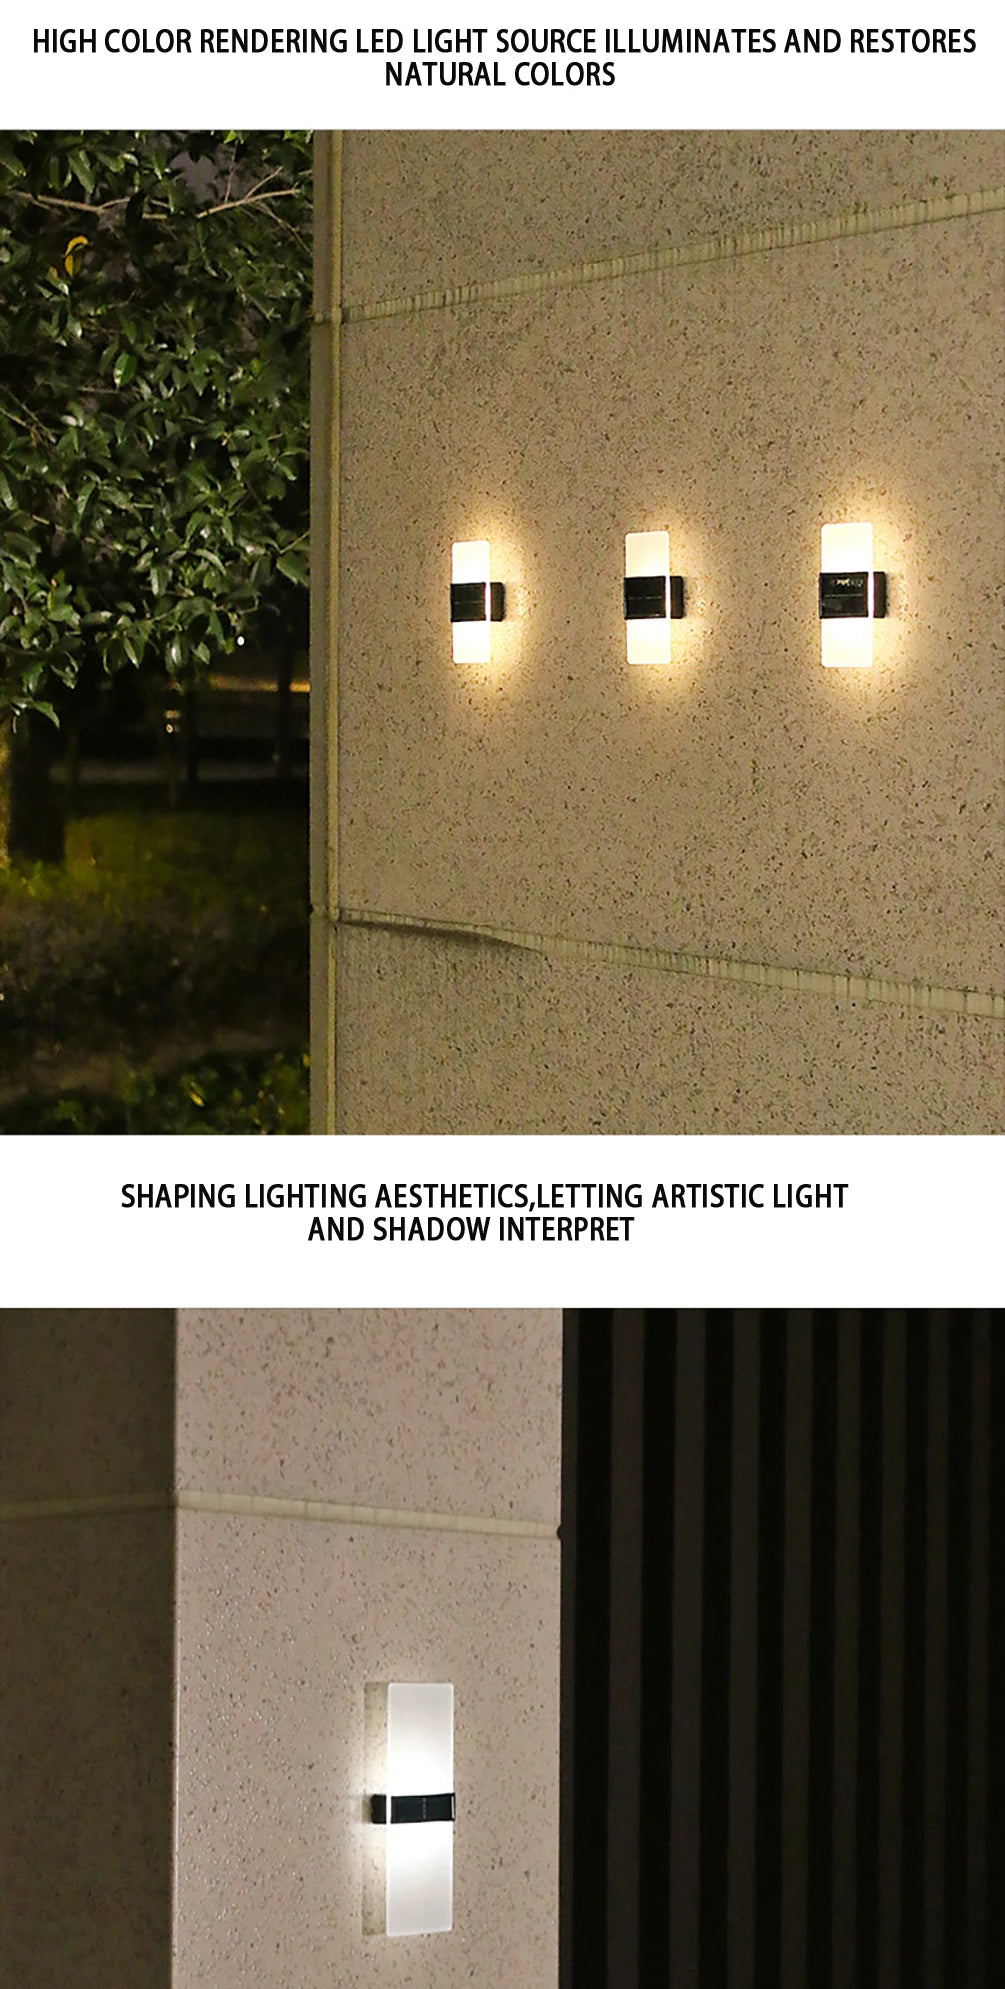 LED Solar Wall Light, LED light source with high color rendering for natural colors and artistic effects.